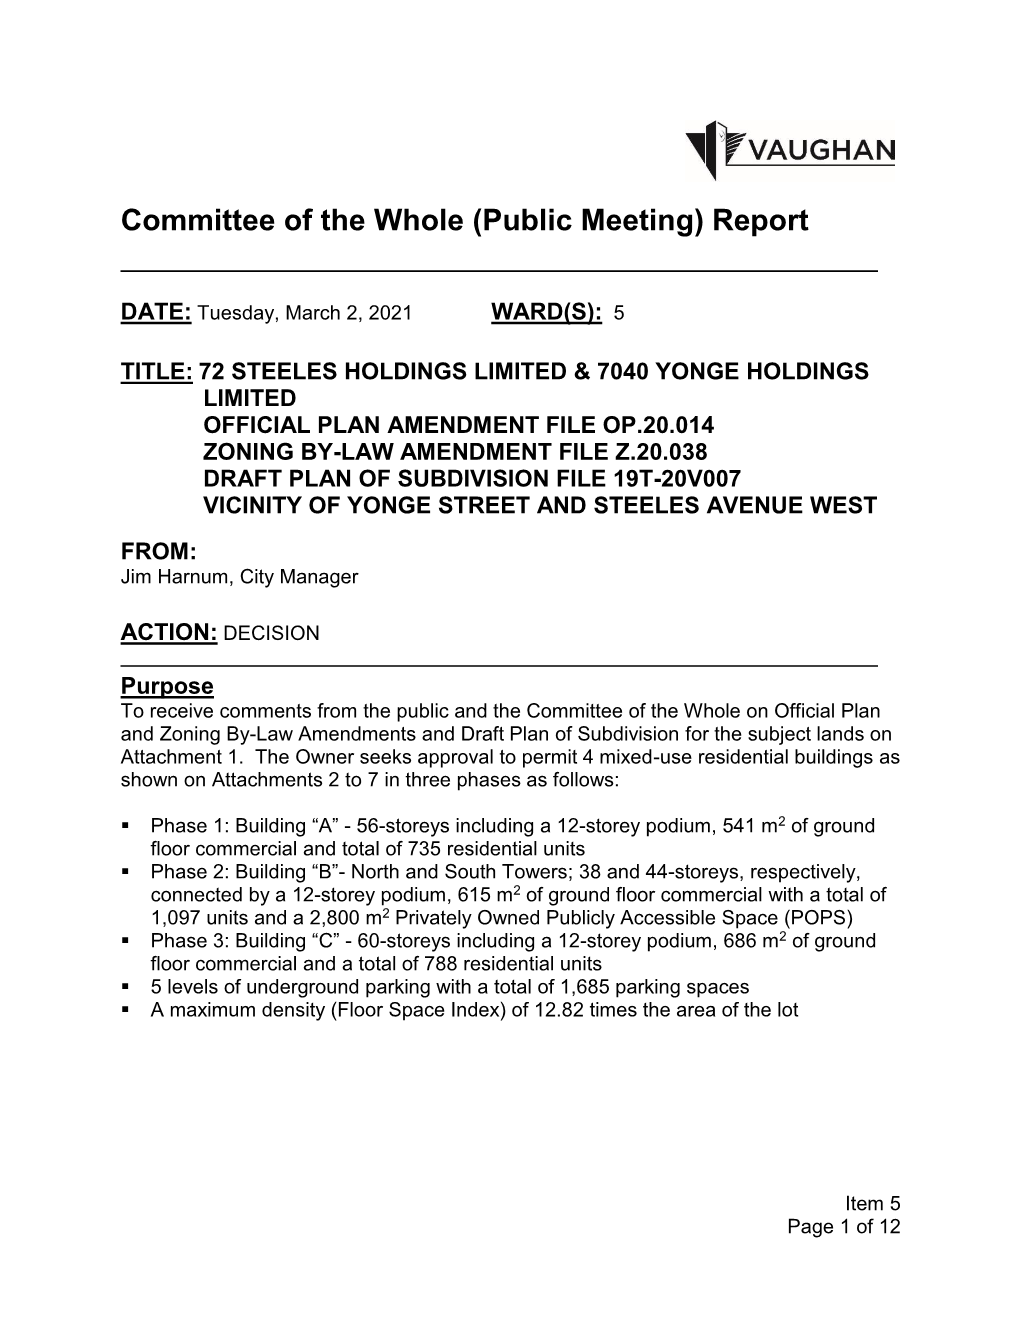 Limited & 7040 Yonge Holdings Limited OFFICIAL PLAN AMENDMENT